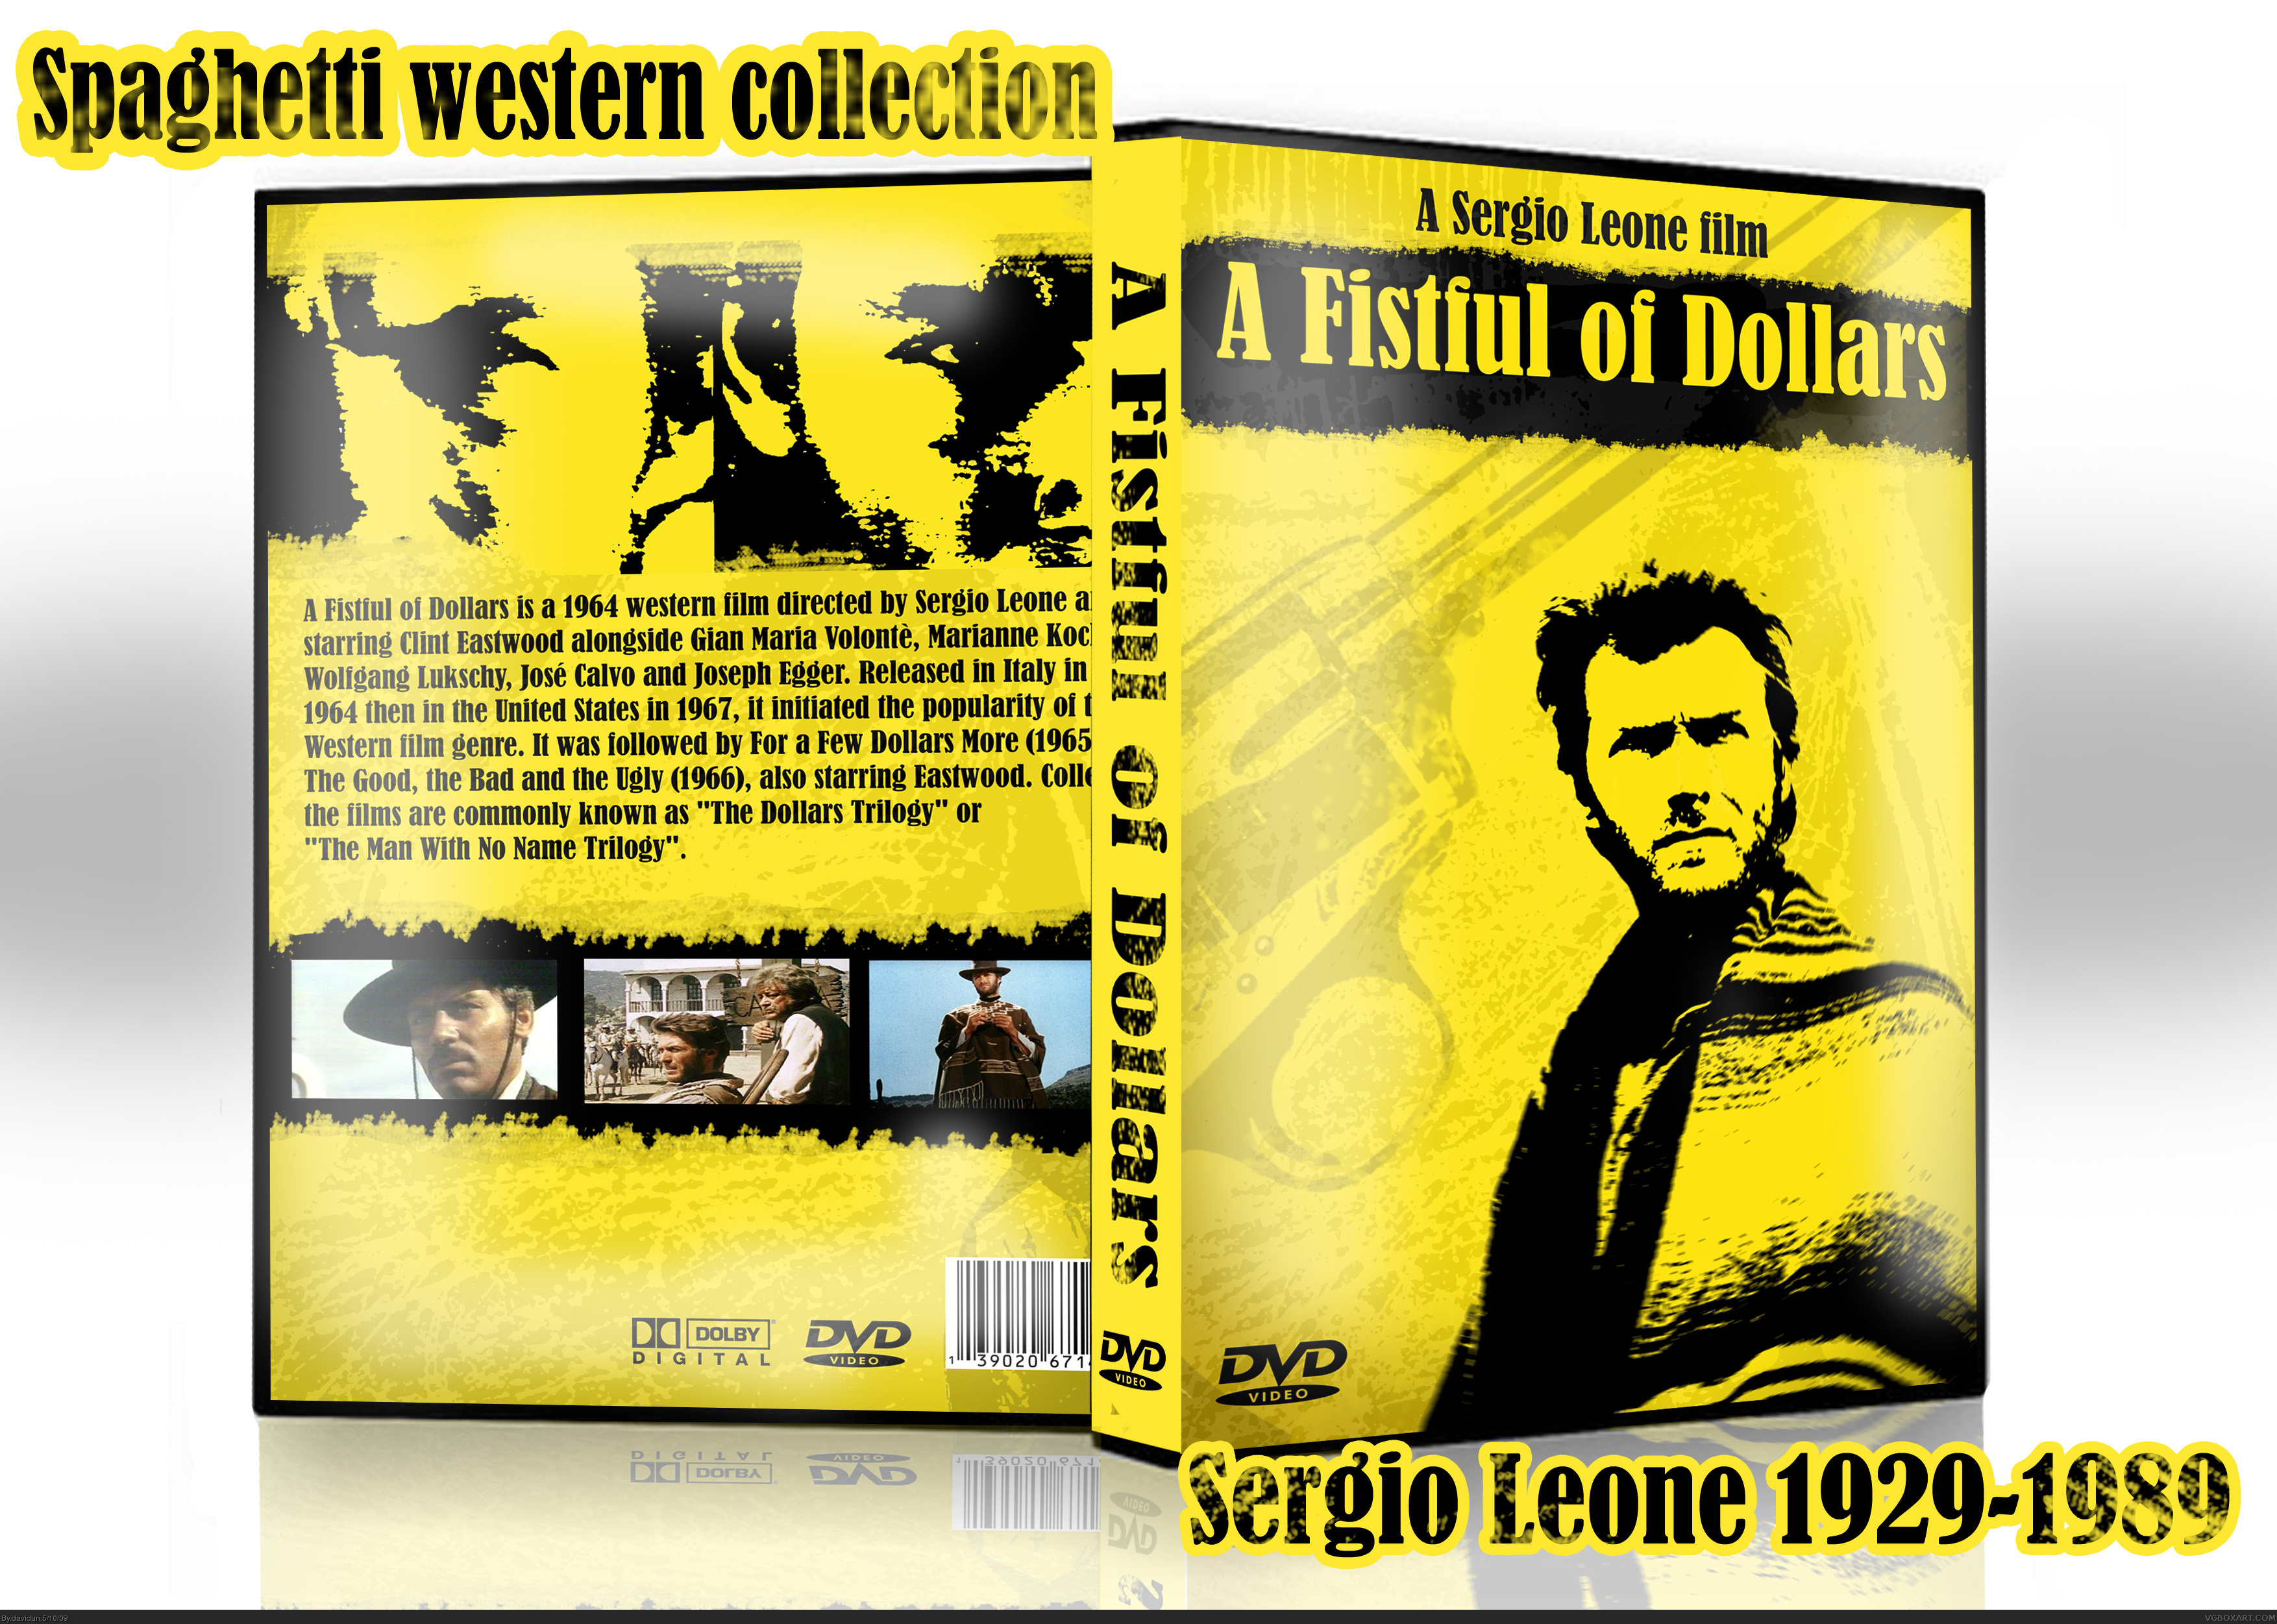 A fistful of dollars box cover